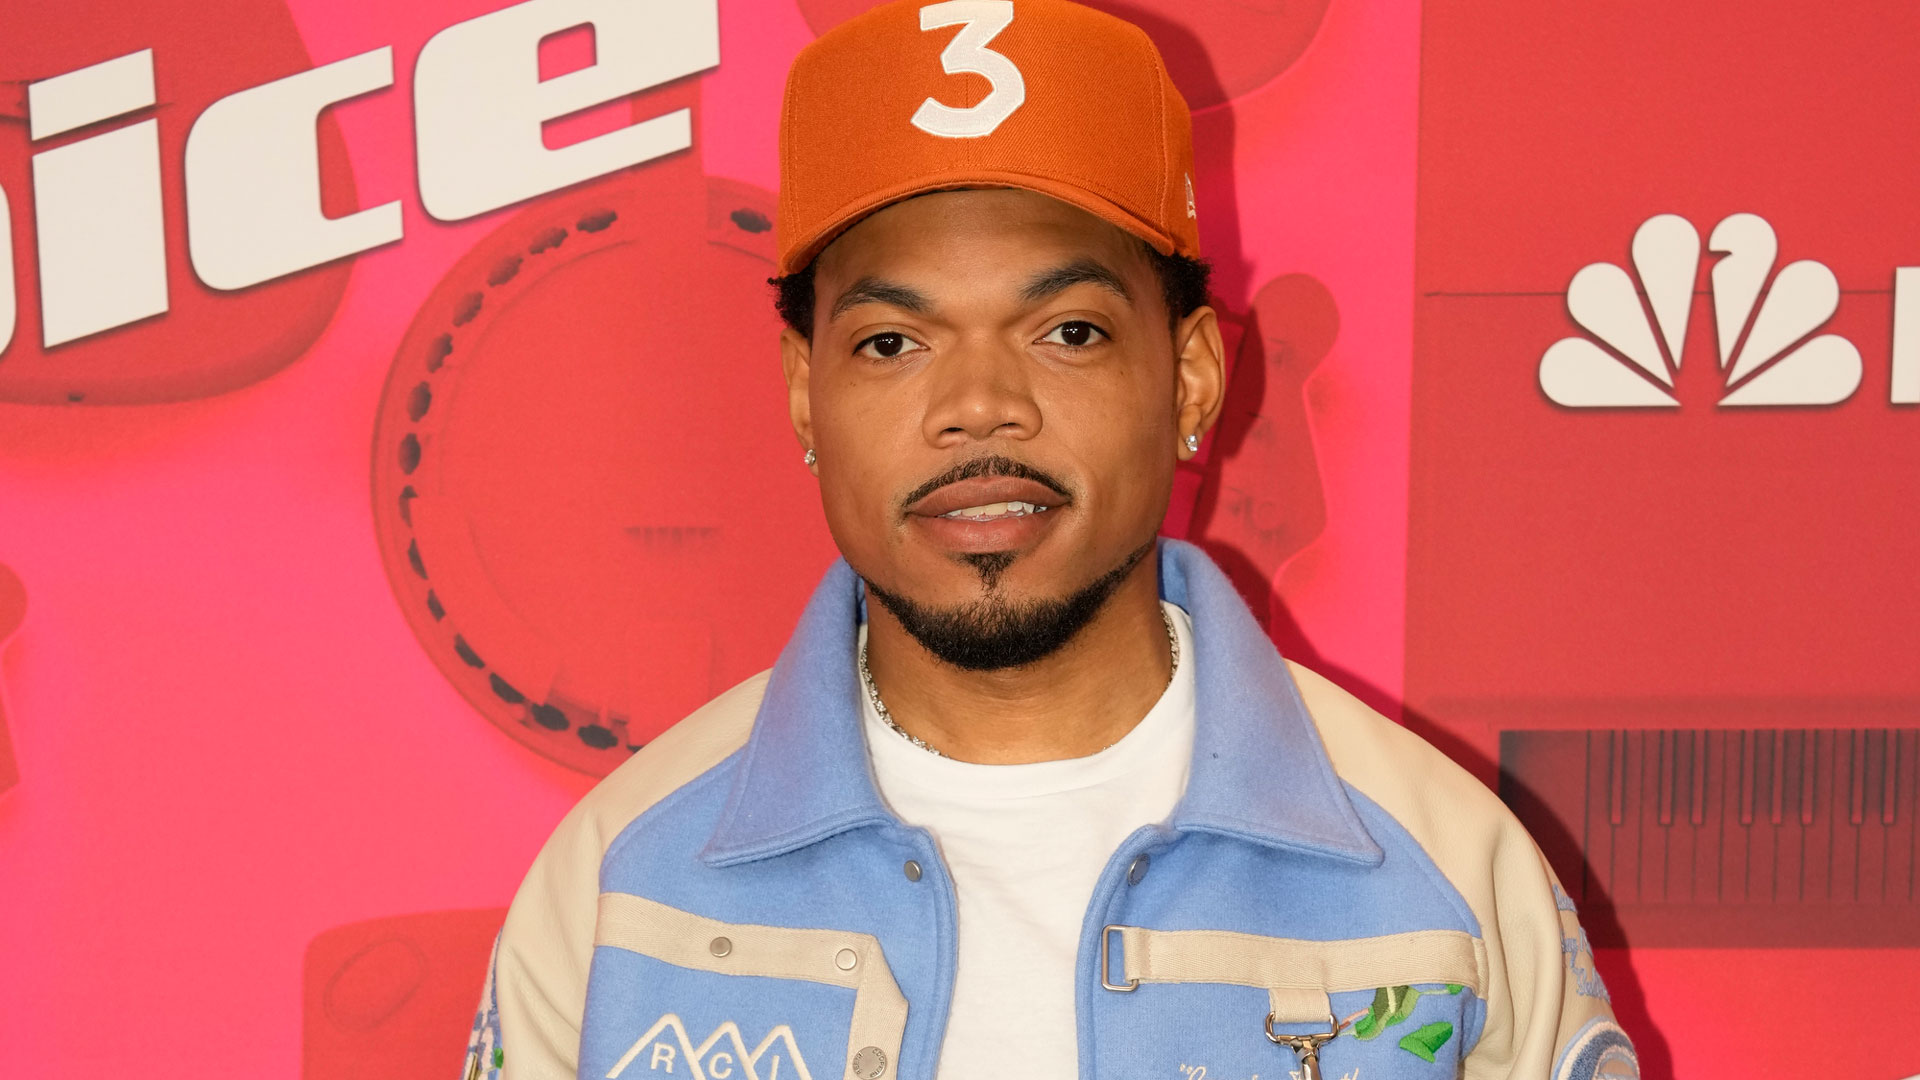 Watch The Voice Highlight Chance the Rapper Performs "Same Drugs